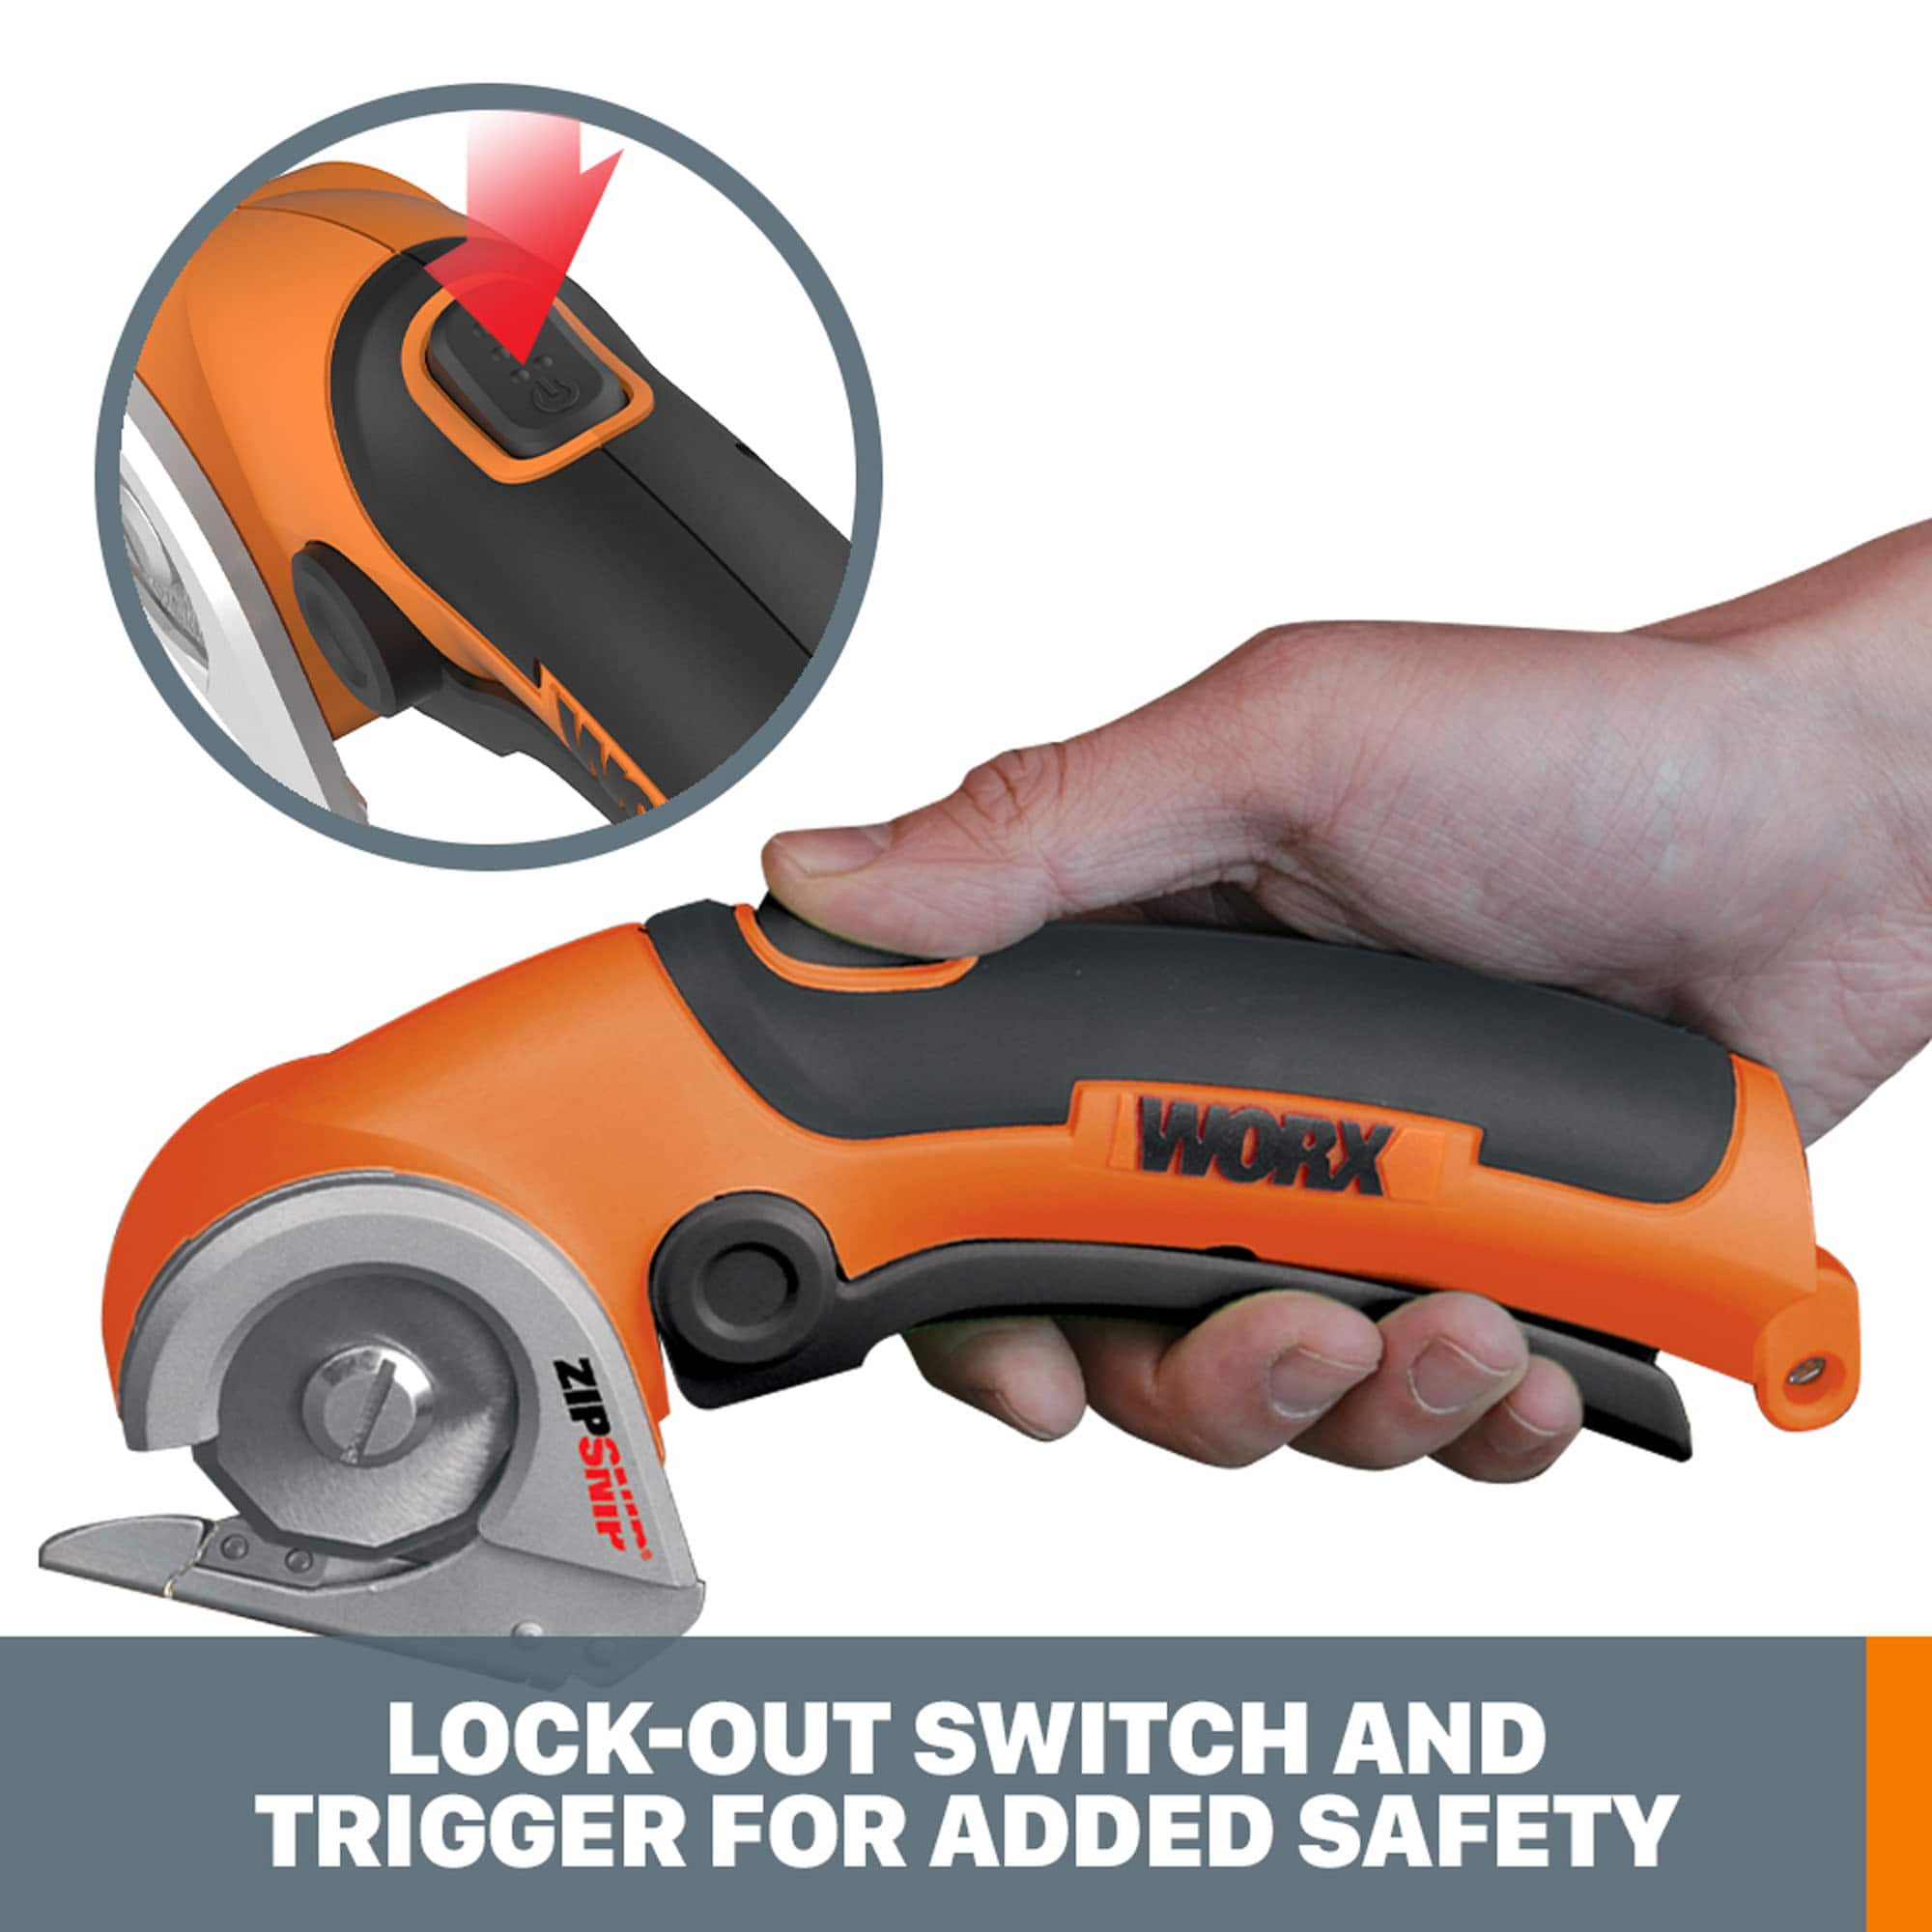 Worx Zip Snip Cordless 4-Volt Rotary Blade Cutter. NEW - Without BOX